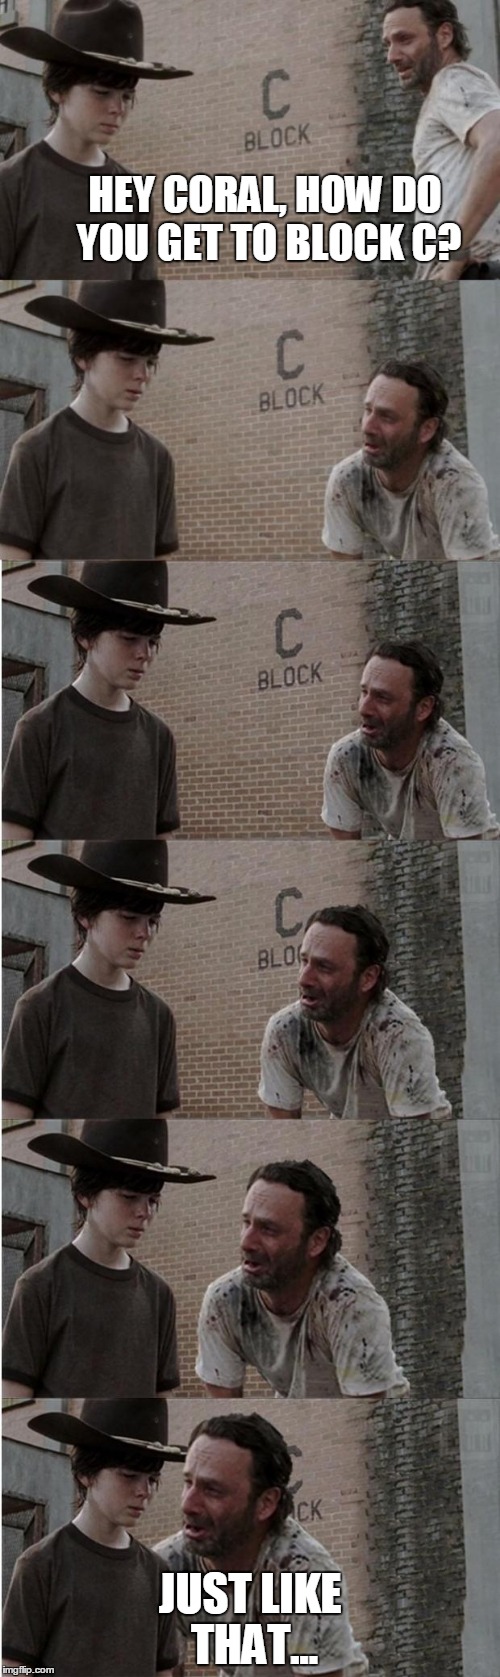 Rick and Carl Longer Meme | HEY CORAL, HOW DO YOU GET TO BLOCK C? JUST LIKE THAT... | image tagged in memes,rick and carl longer | made w/ Imgflip meme maker